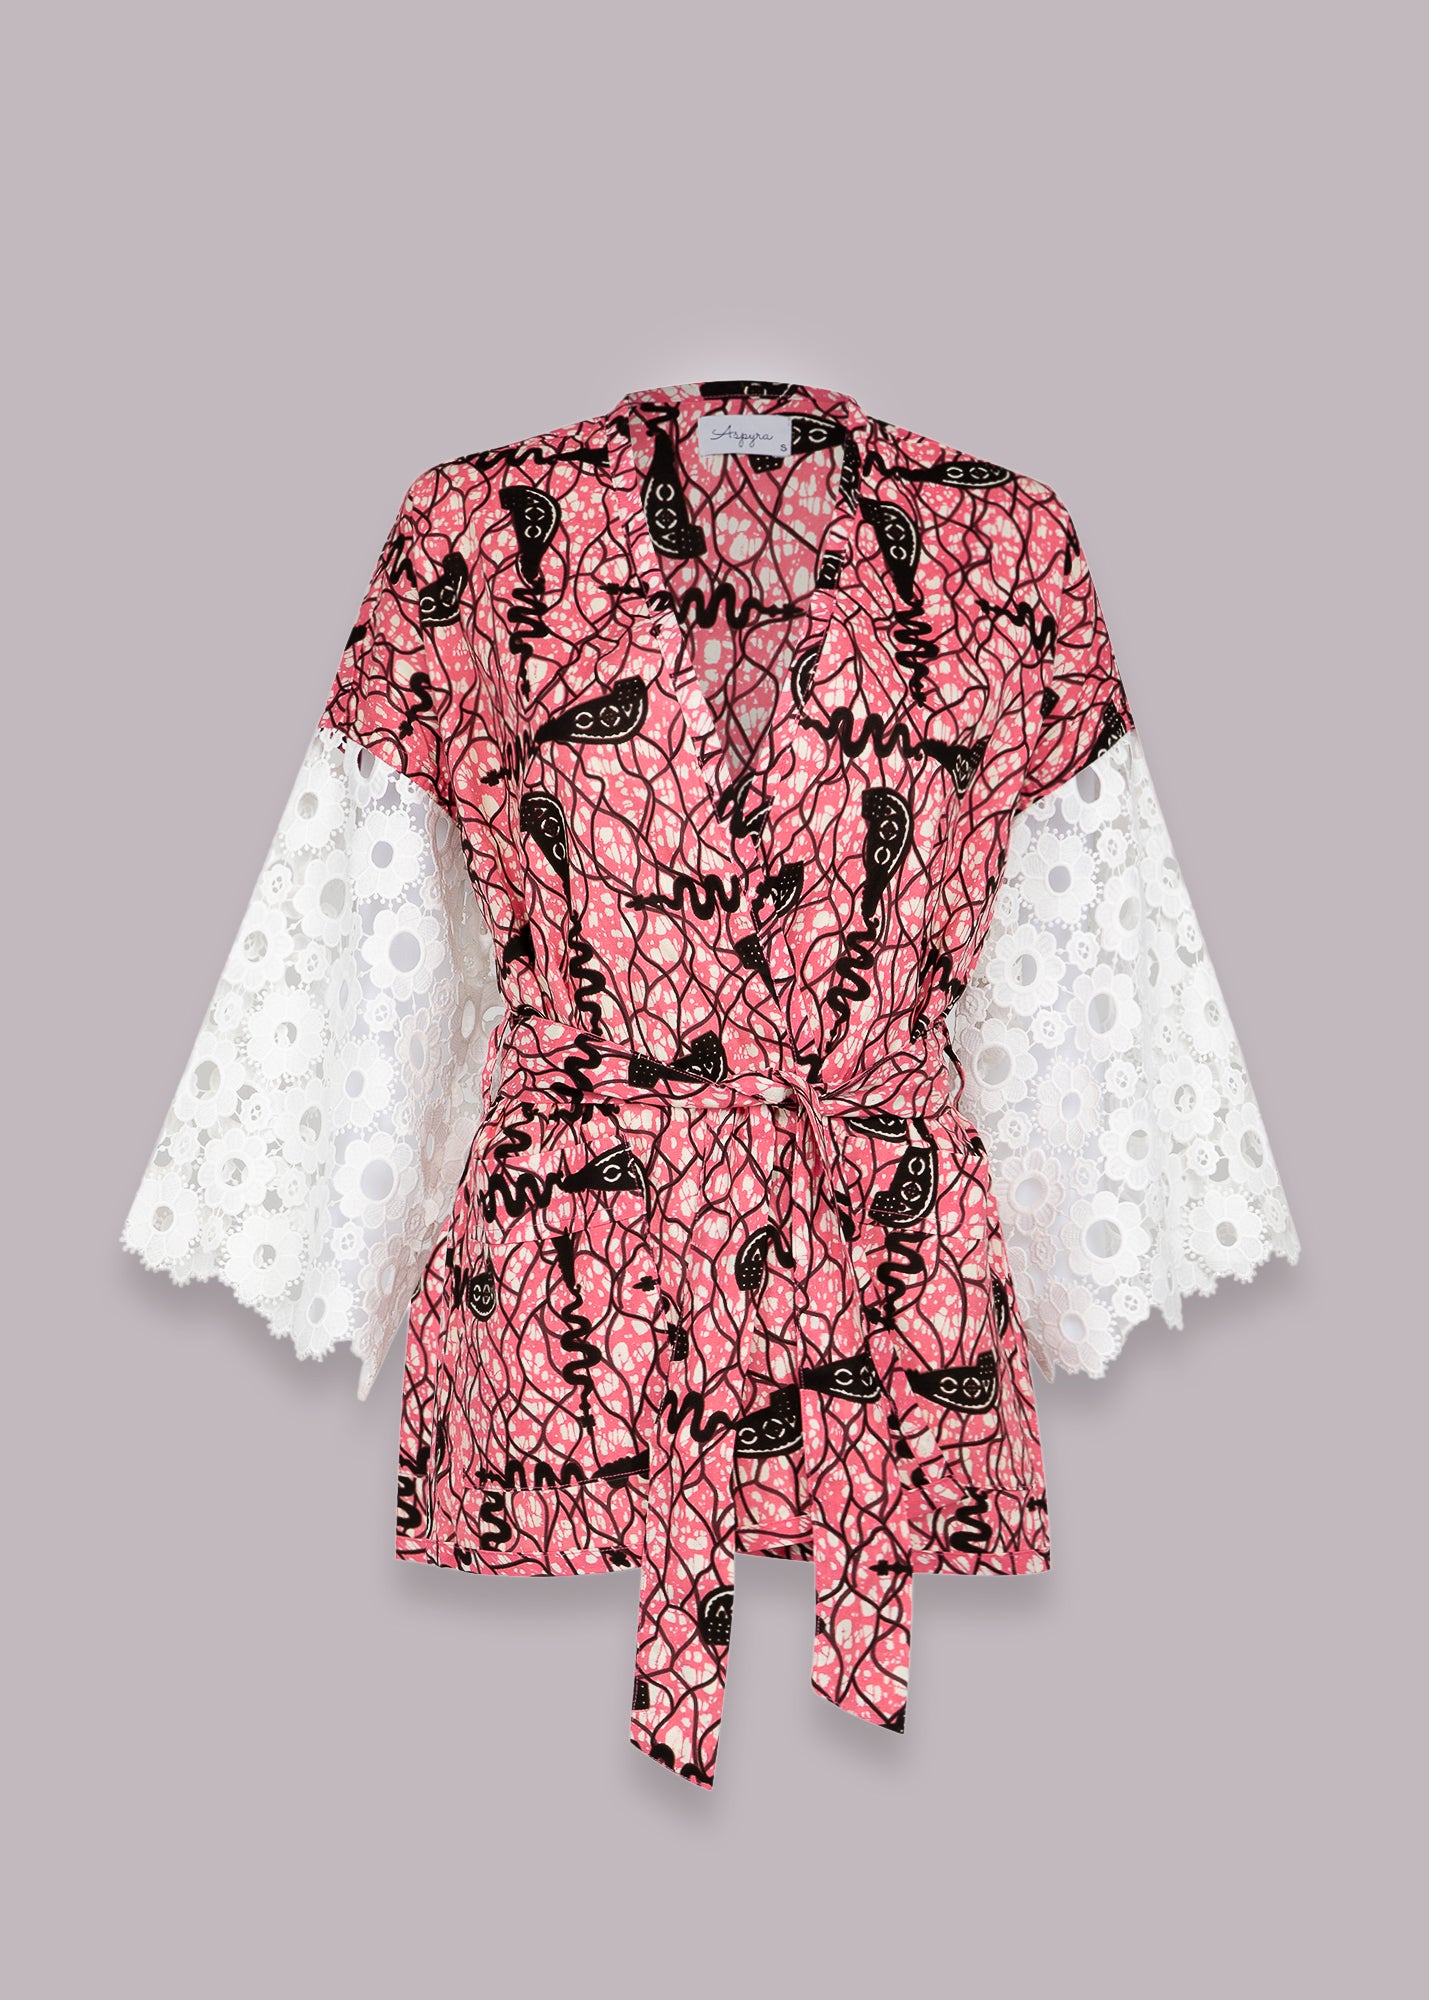 Theme Song in Flamingo Short Kimono Jacket with Lace 1